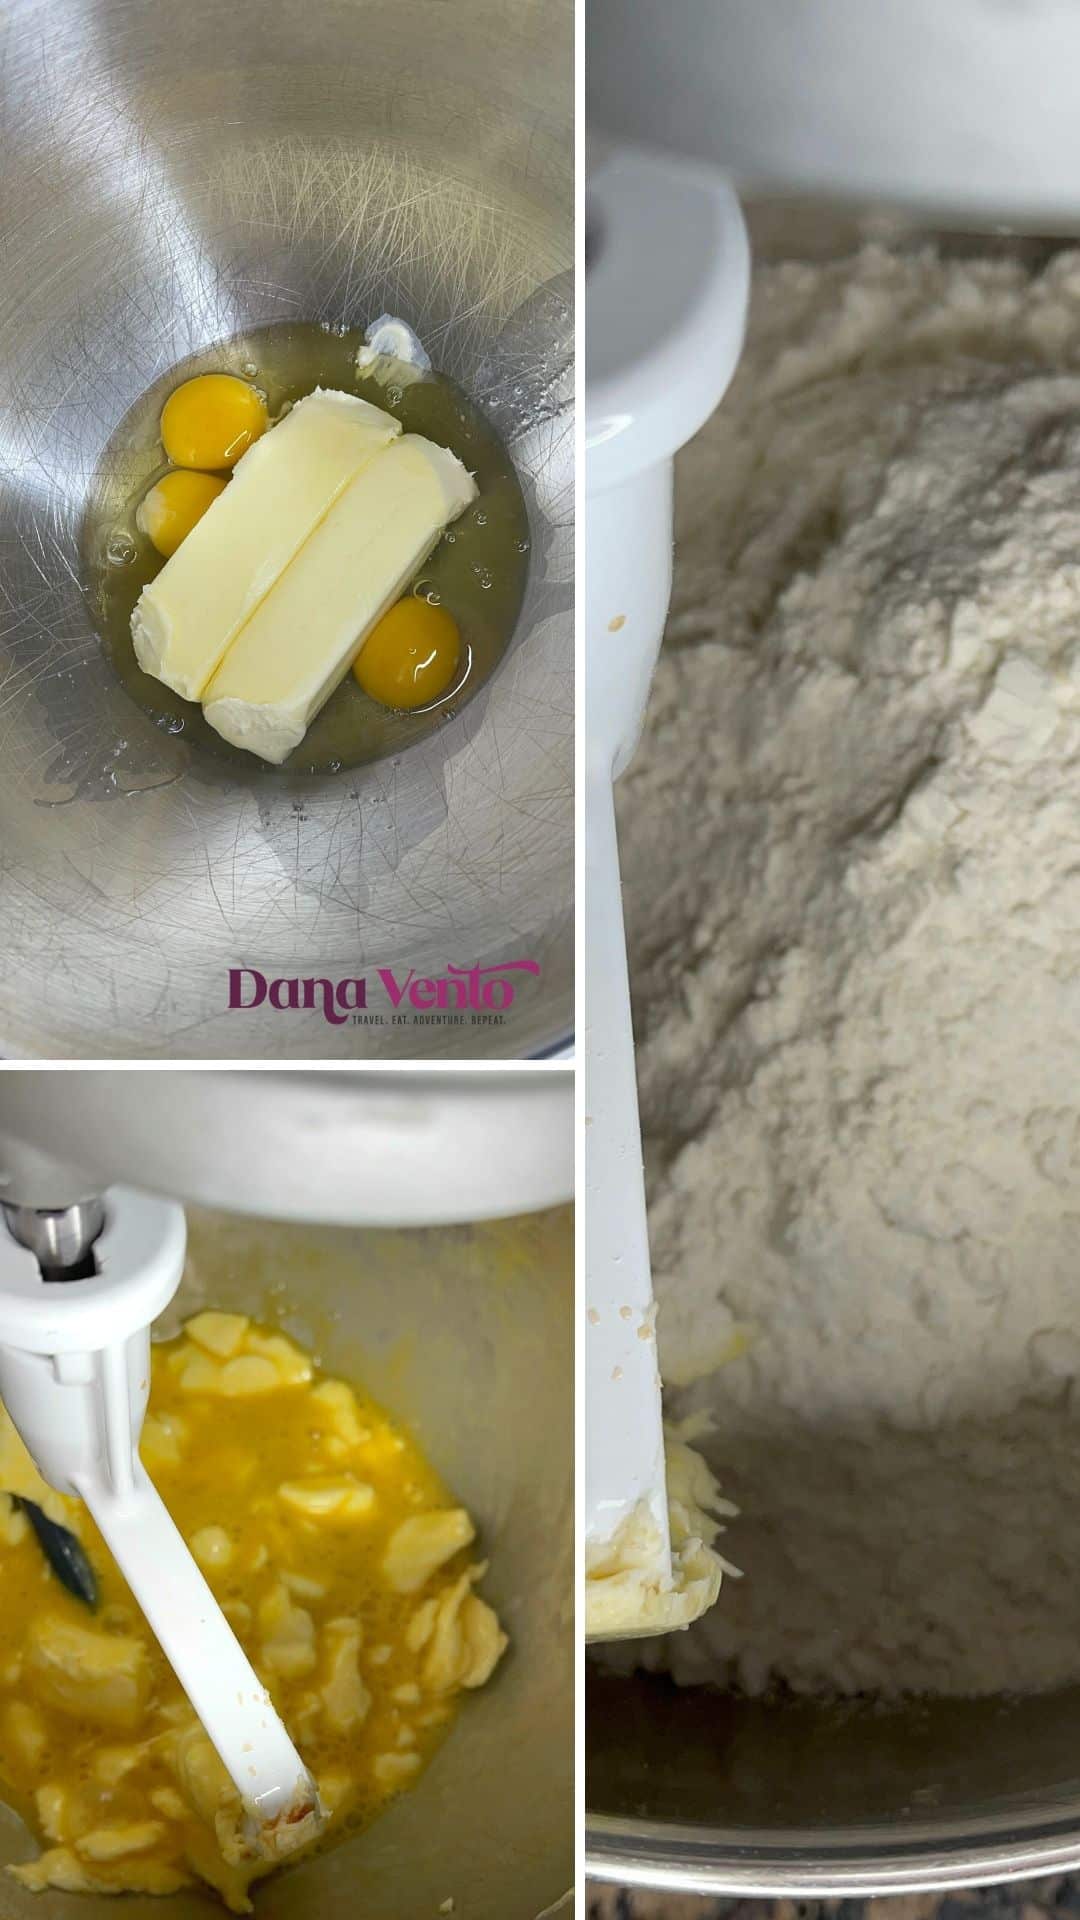 Butter and eggs with flour and cake mix